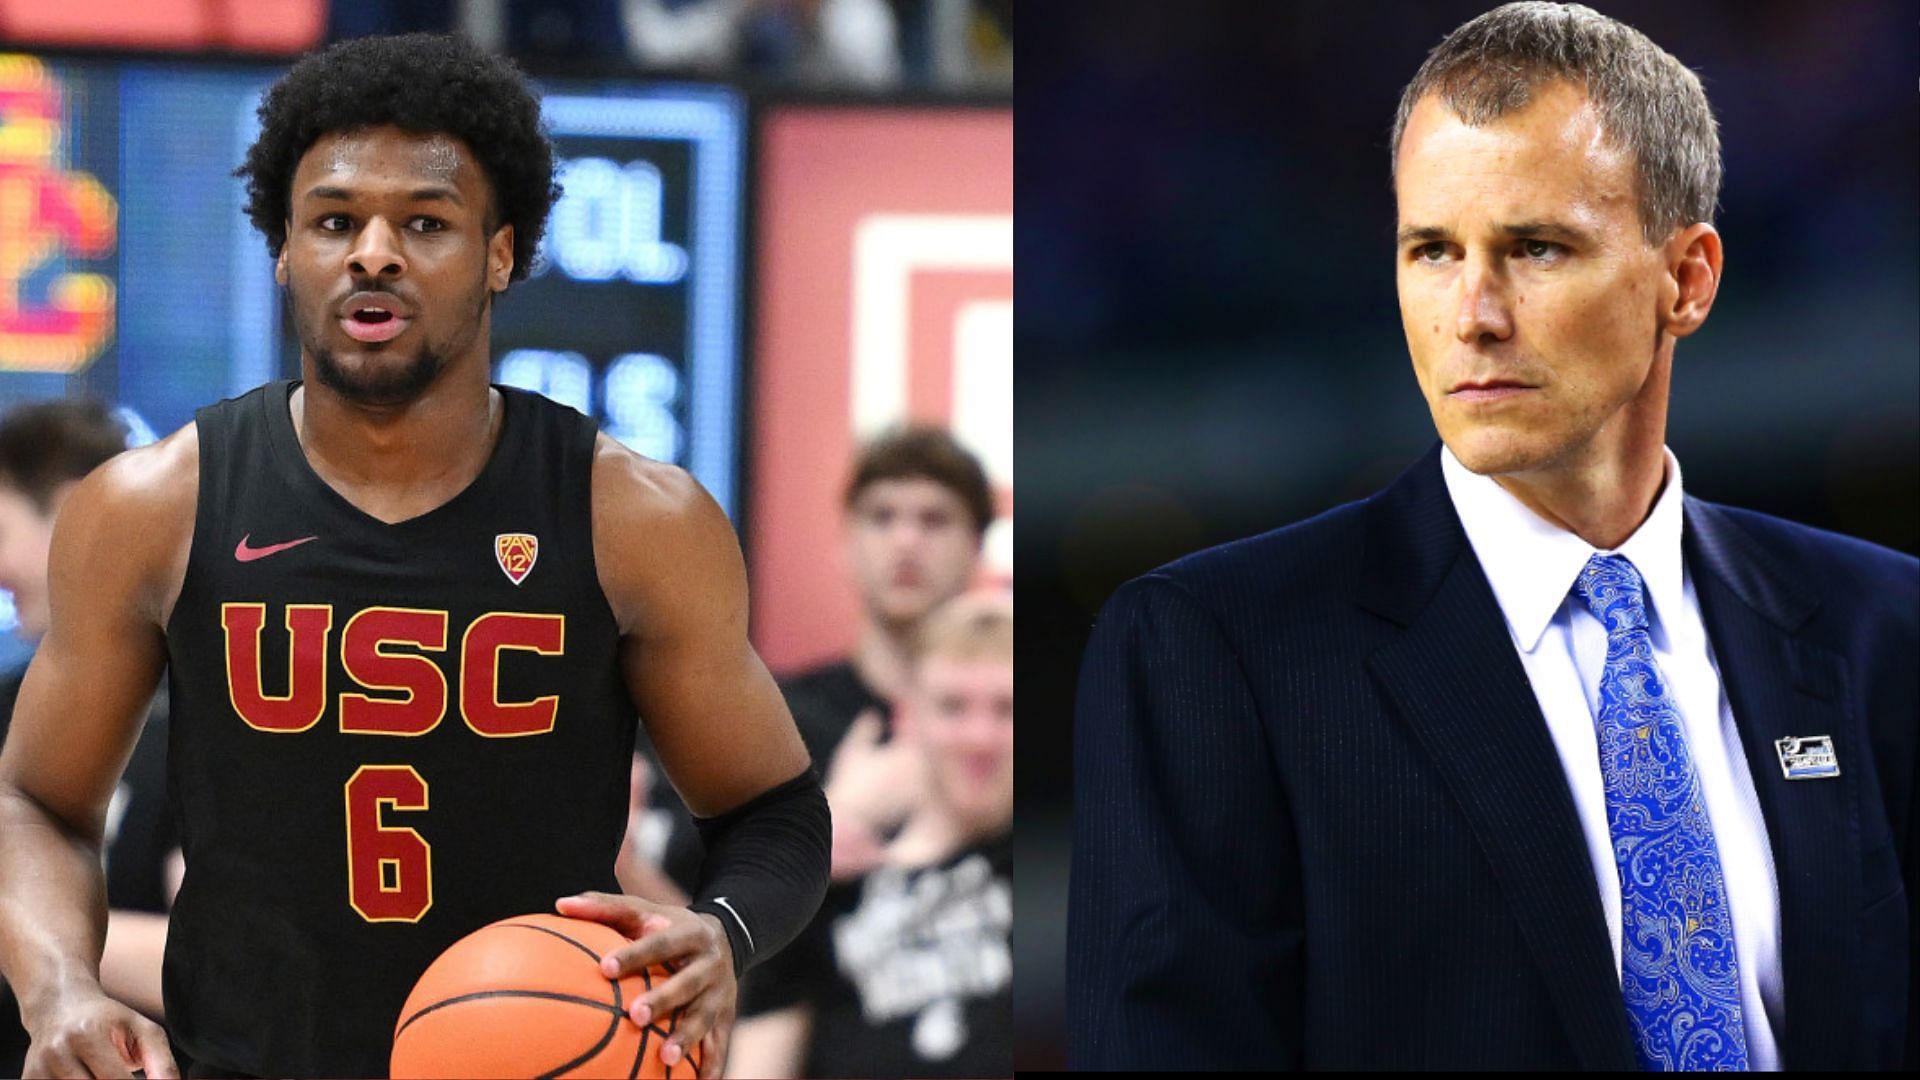 SC HC Andy Enfield defends Bronny James